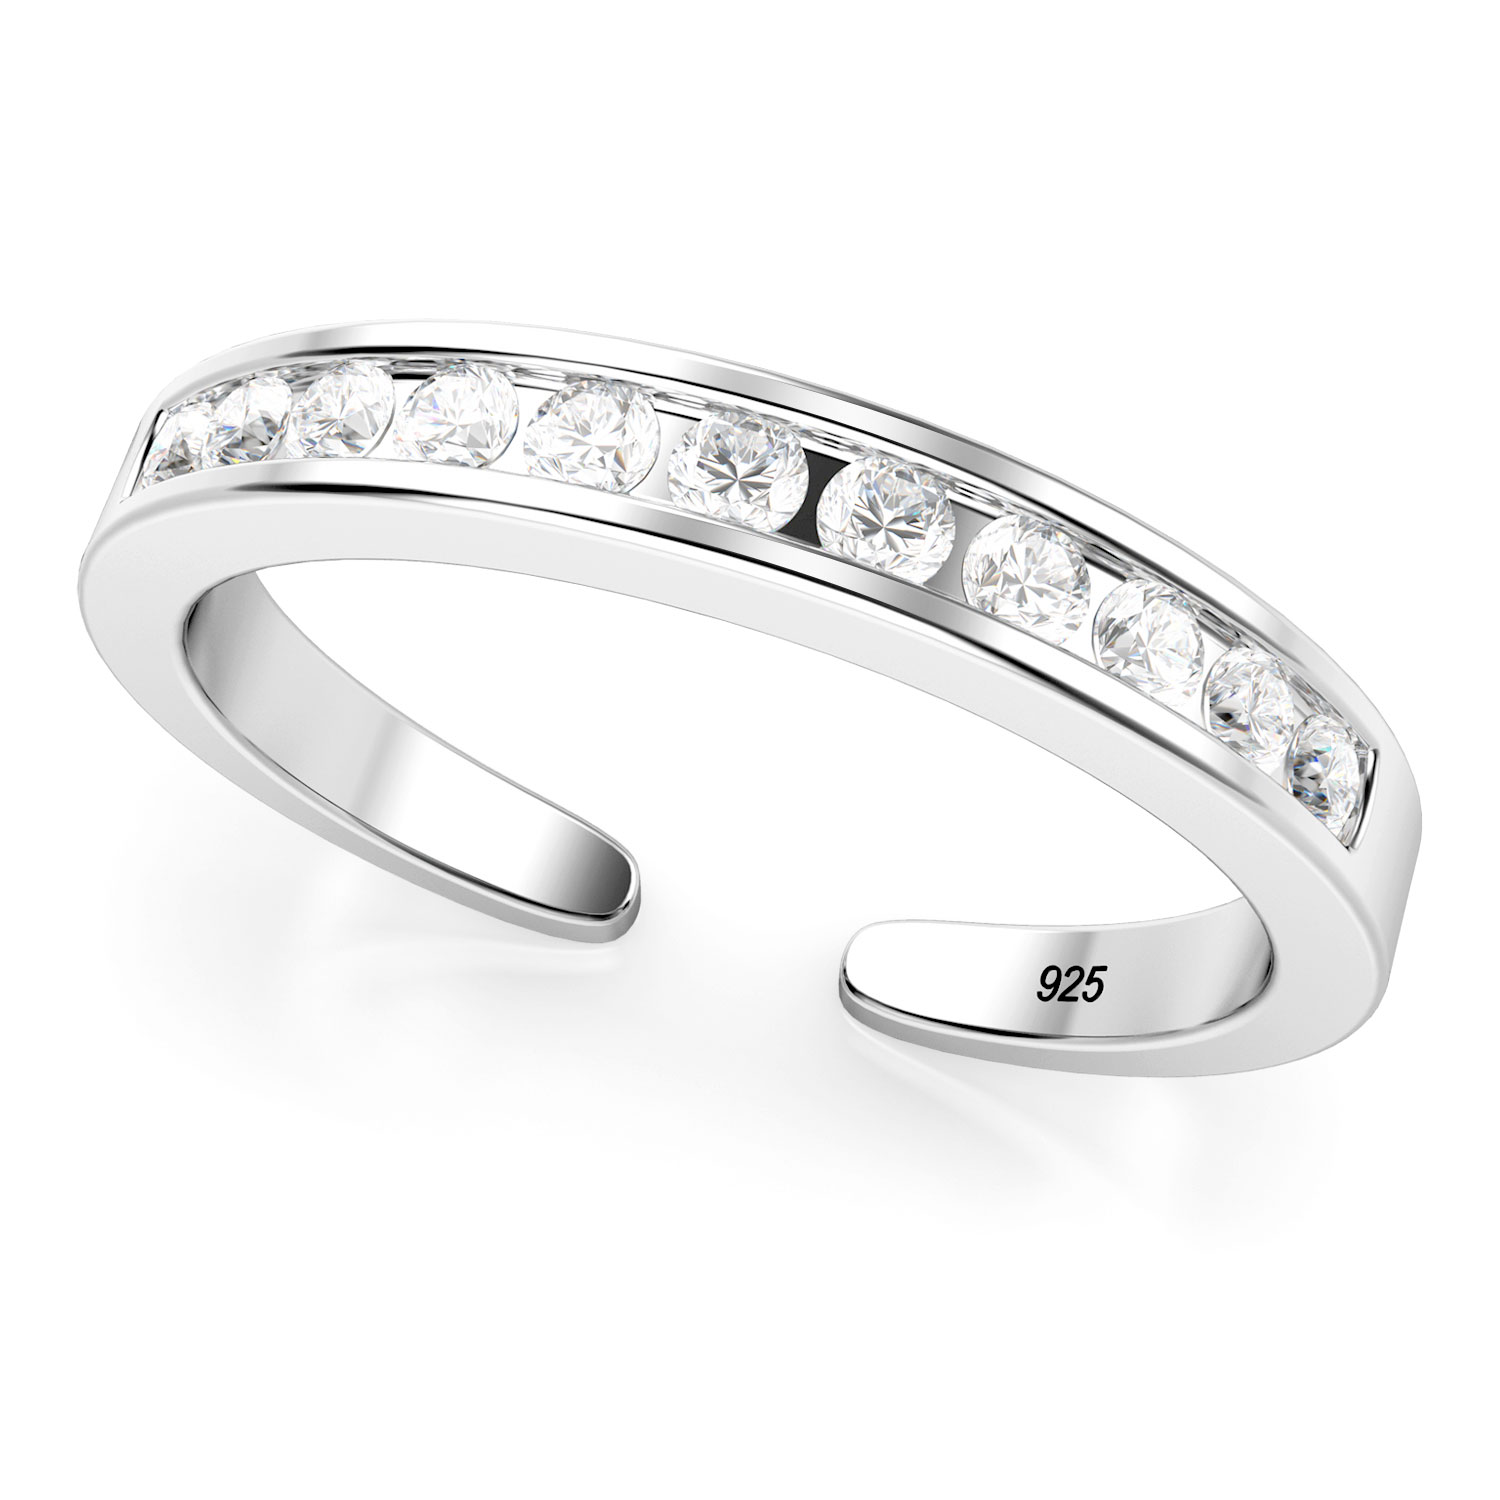 Sterling Silver Cubic Zirconia Adjustable Toe Band Ring - image 1 of 1